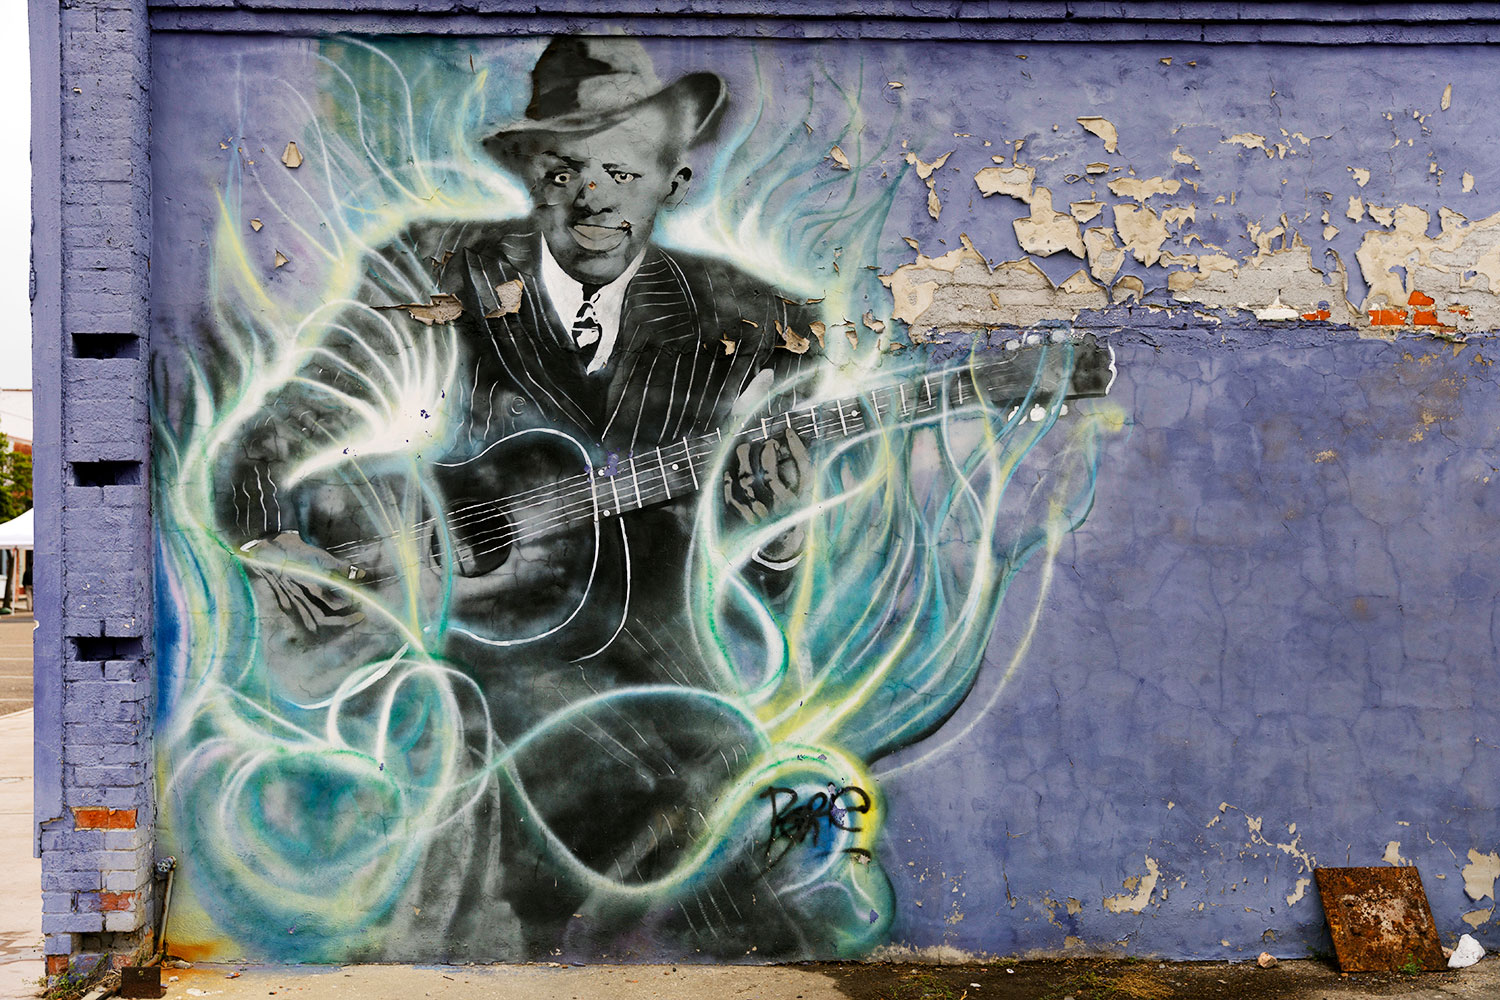 Mural of Mississippi jazz musician Robert Johnson in Clarksdale, a music center in the Mississippi Delta.